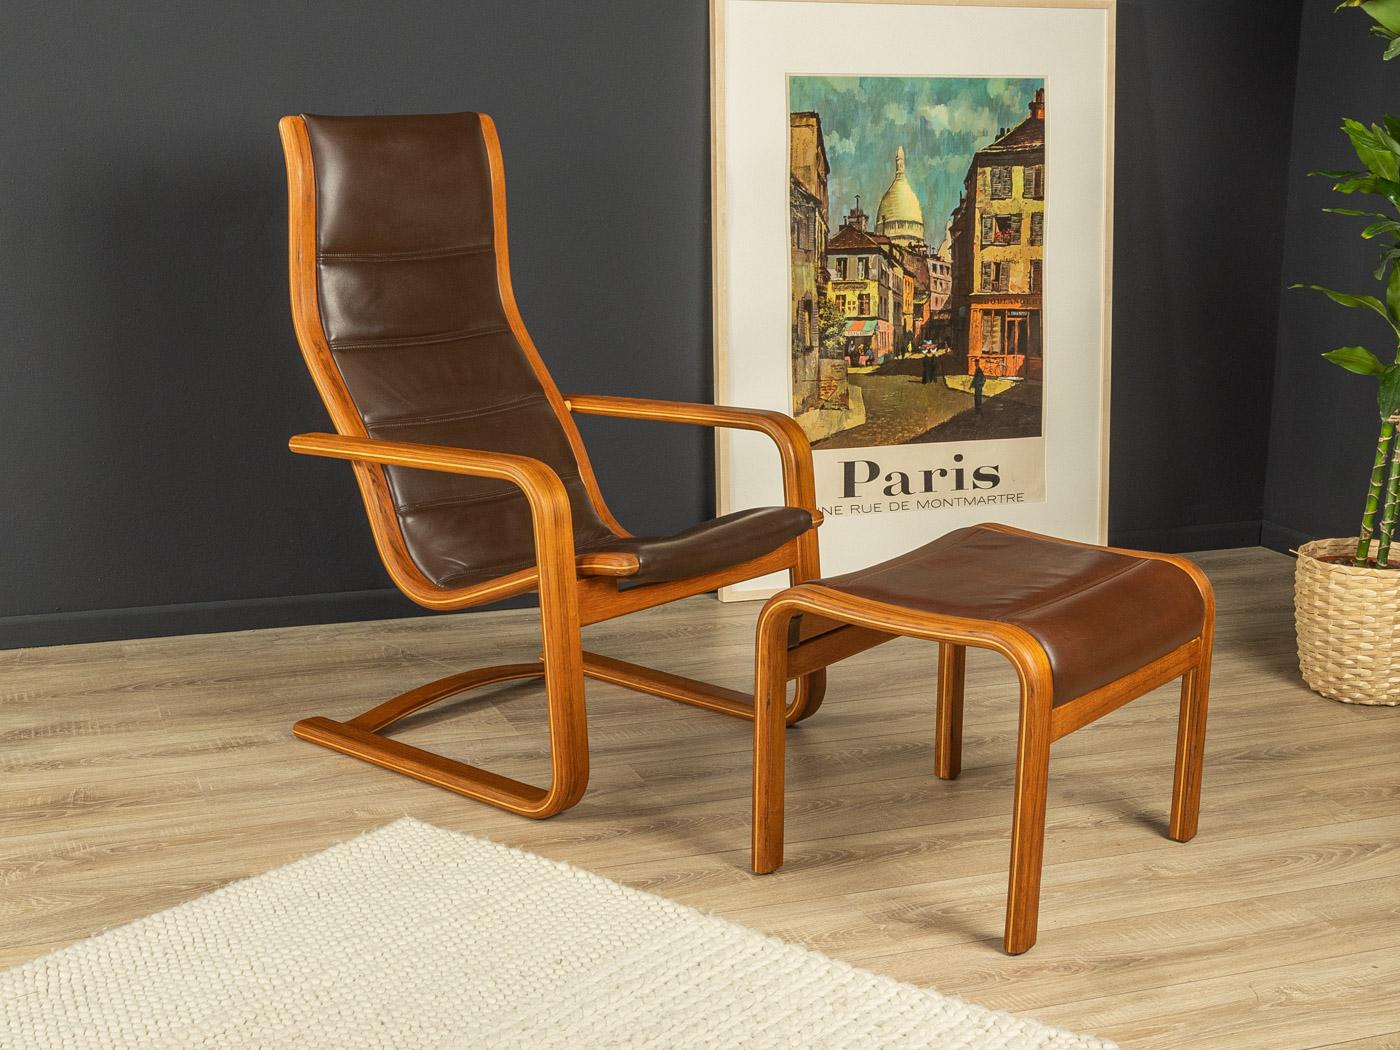 Rare cantilever chair with stool from the 1960s. “Lamello” model by Yngve Ekström for Swedese. Wonderfully curved frame made of solid teak with the high-quality original leather cover in brown.

Quality Features:
- Accomplished design: perfect